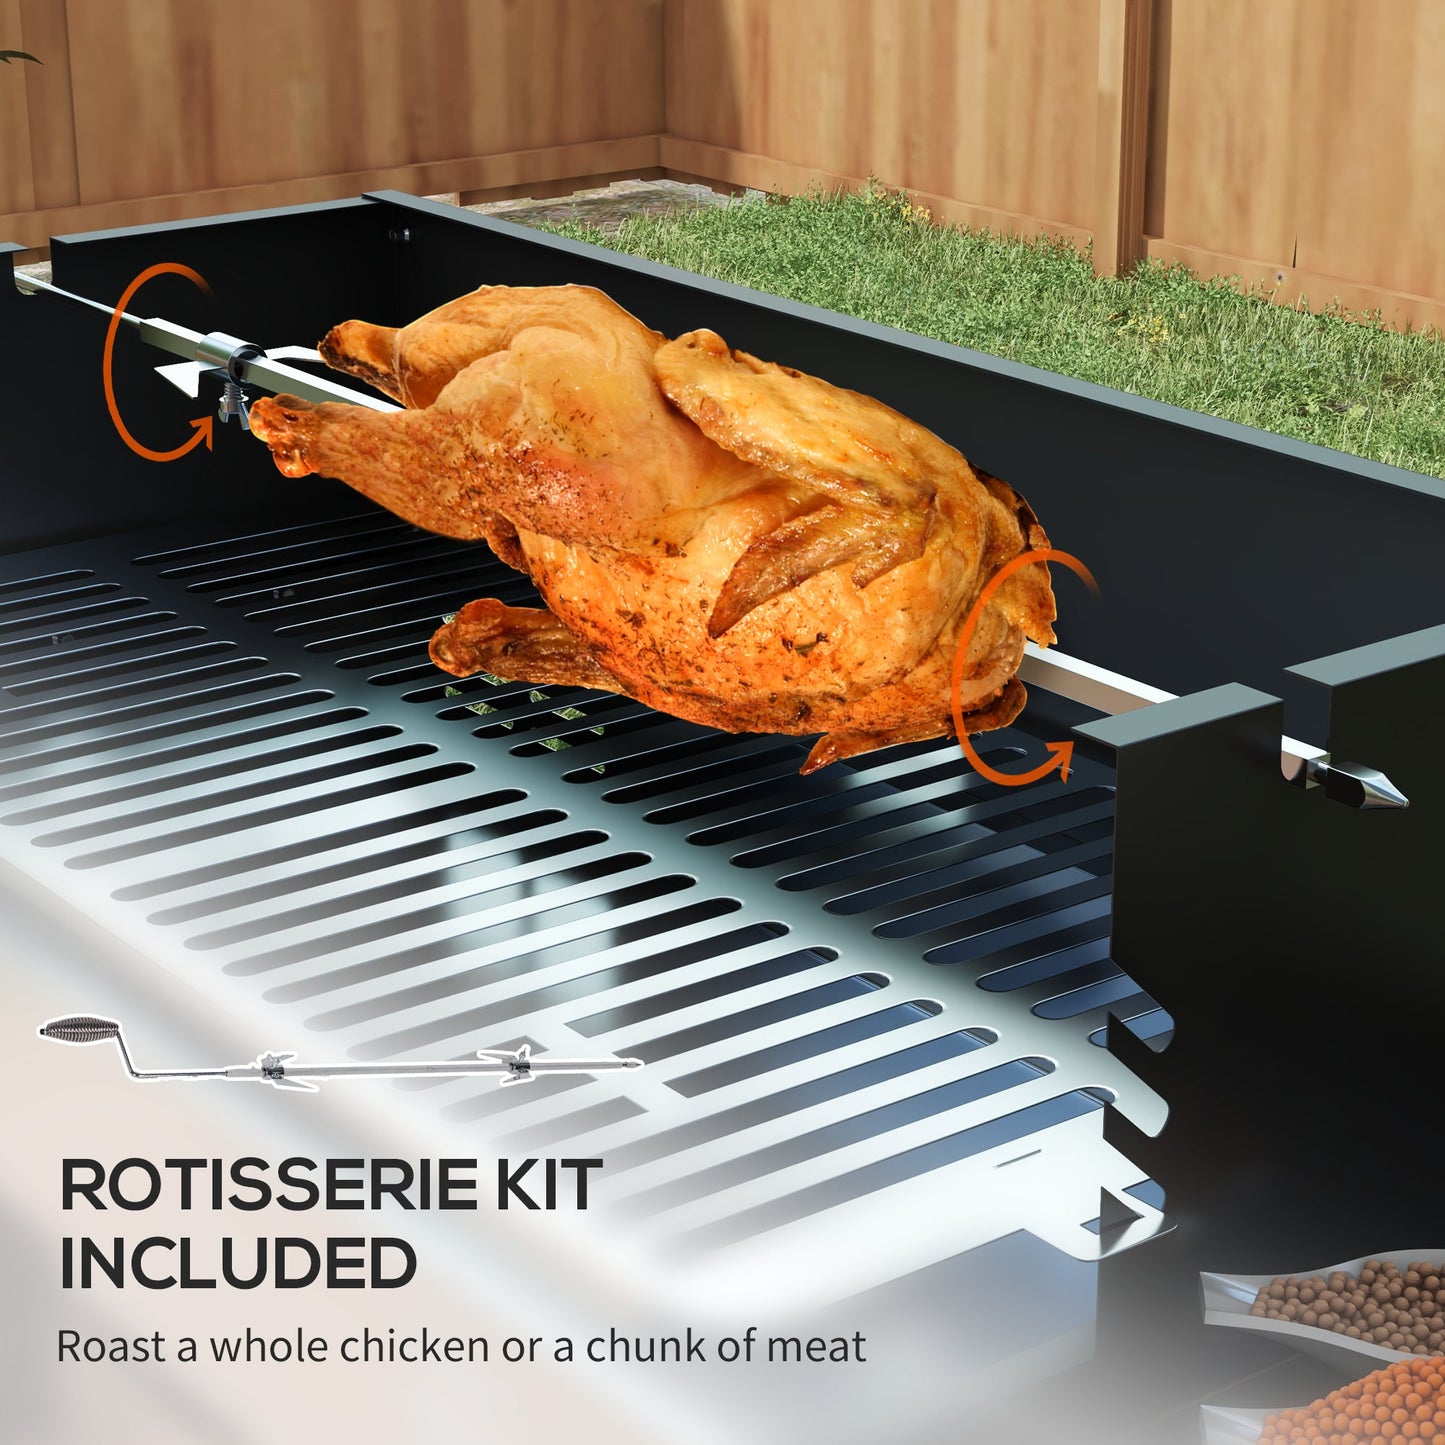 -Outsunny BBQ Rotisserie Grill Charcoal Split Roaster for Chicken Turkey 3-Level Grill Grate, Storage Shelves, Stainless Steel - Outdoor Style Company